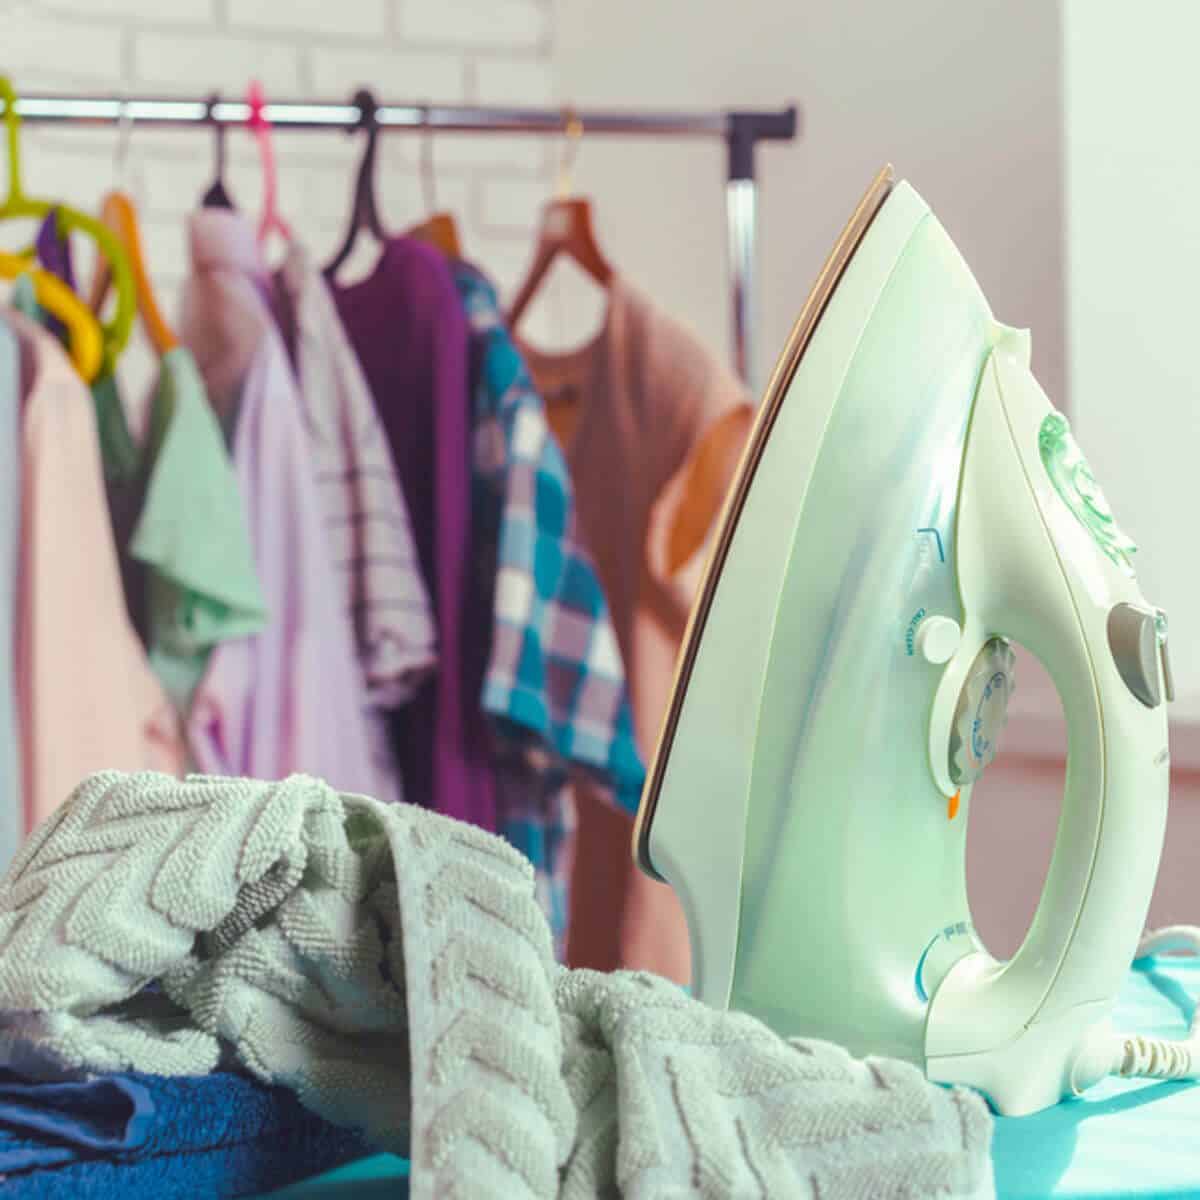 13 Laundry Tips for Washing Your Clothes â The Family Handyman